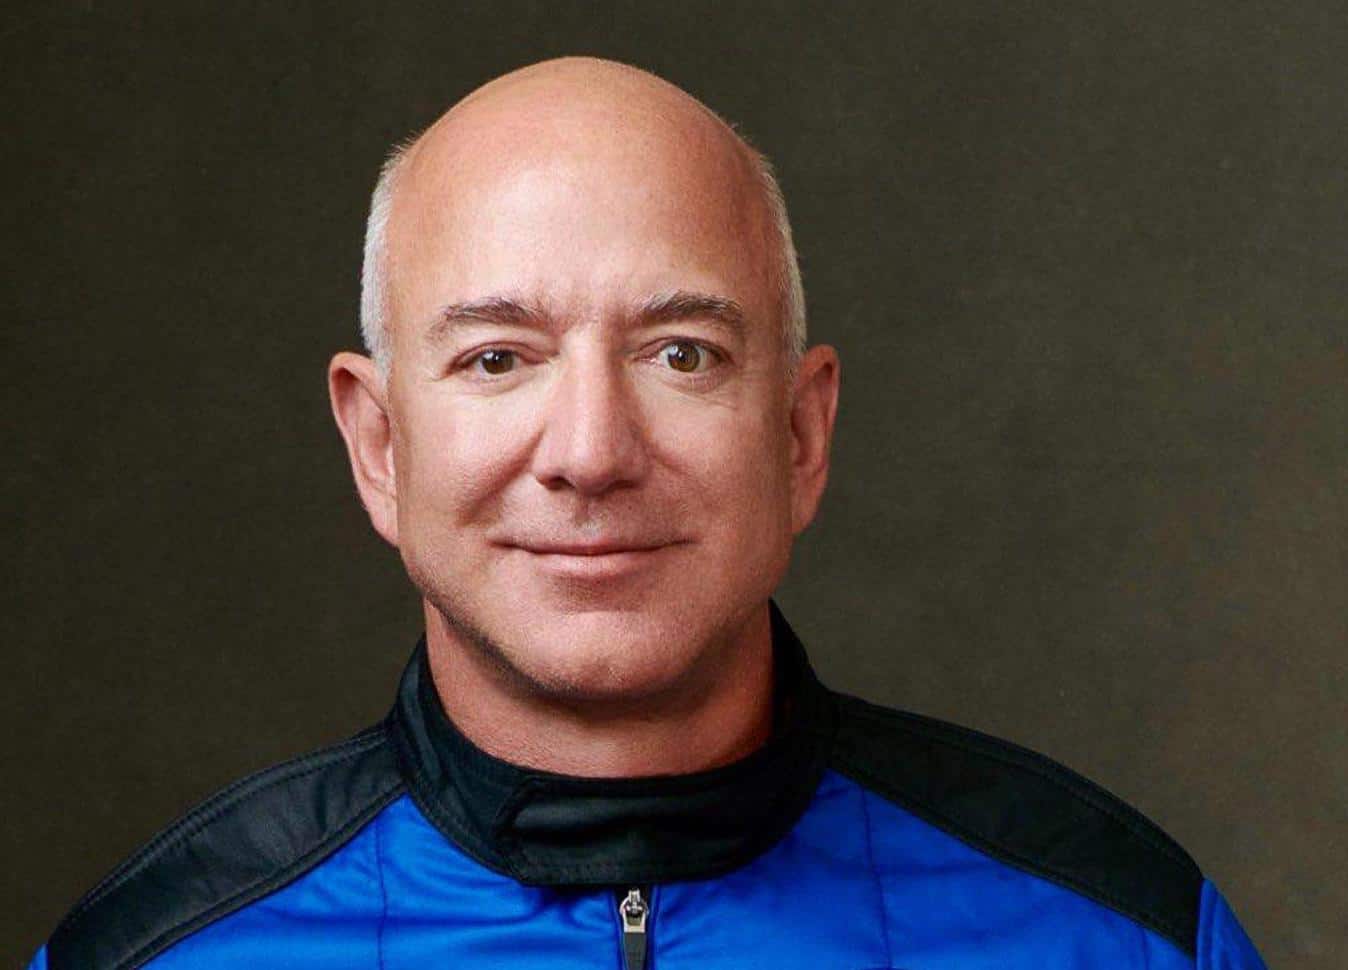 Watch: Jeff Bezos rocket fails during lift-off and veers off course – ‘That wasn’t planned’